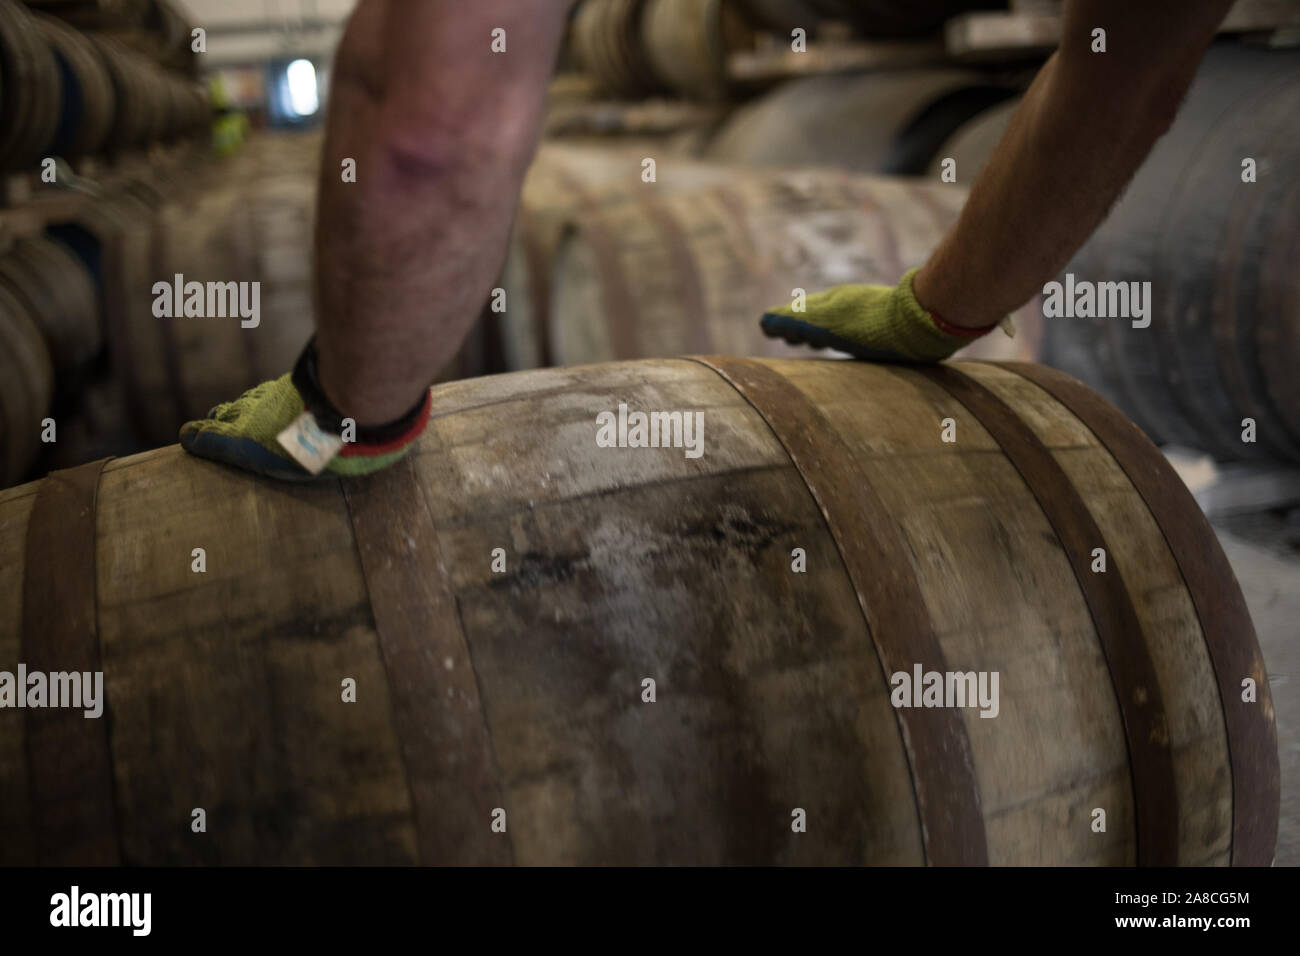 Unloading casks of Kilchoman single malt whisky into the warehouse, at Kilchoman distillery, founded in 2005 by Anthony Wills, in Islay, Scotland, 16 October 2019. Stock Photo